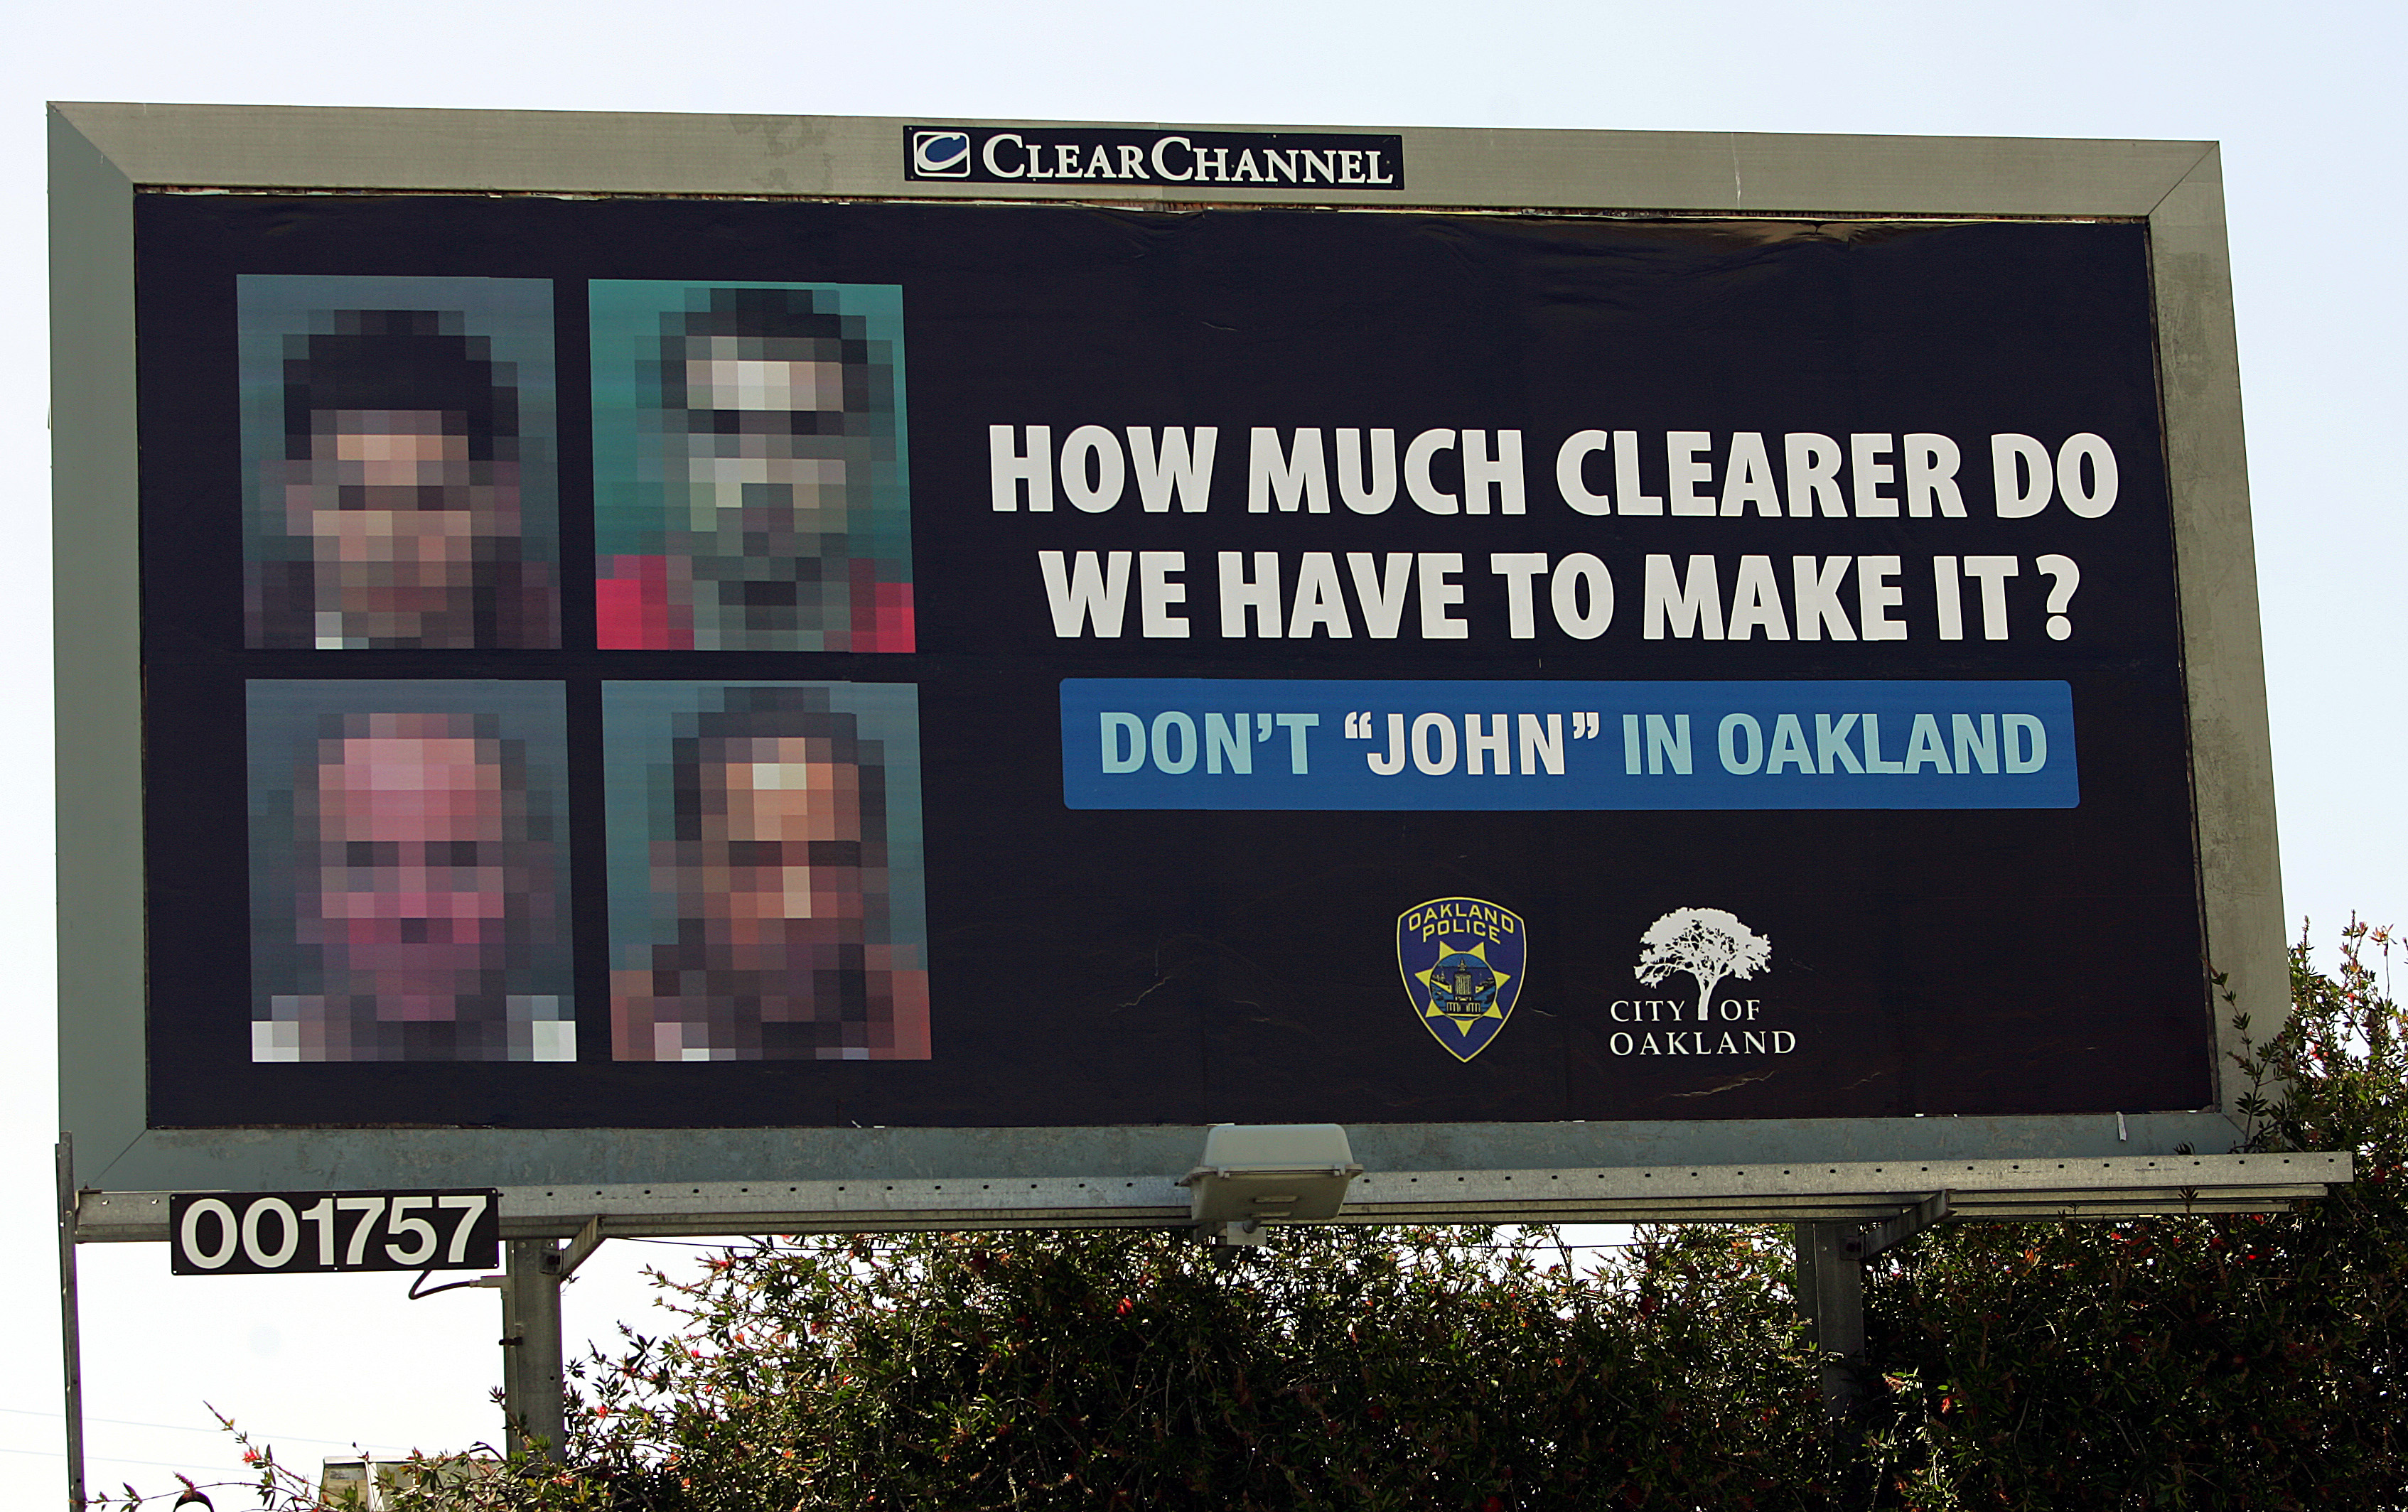 Images of four men convicted of soliciting prostitutes, intentionally blurred so they could not be recognized, are seen on a billboard on June 2, 2005, in Oakland, Calif. (Ben Margot—AP)